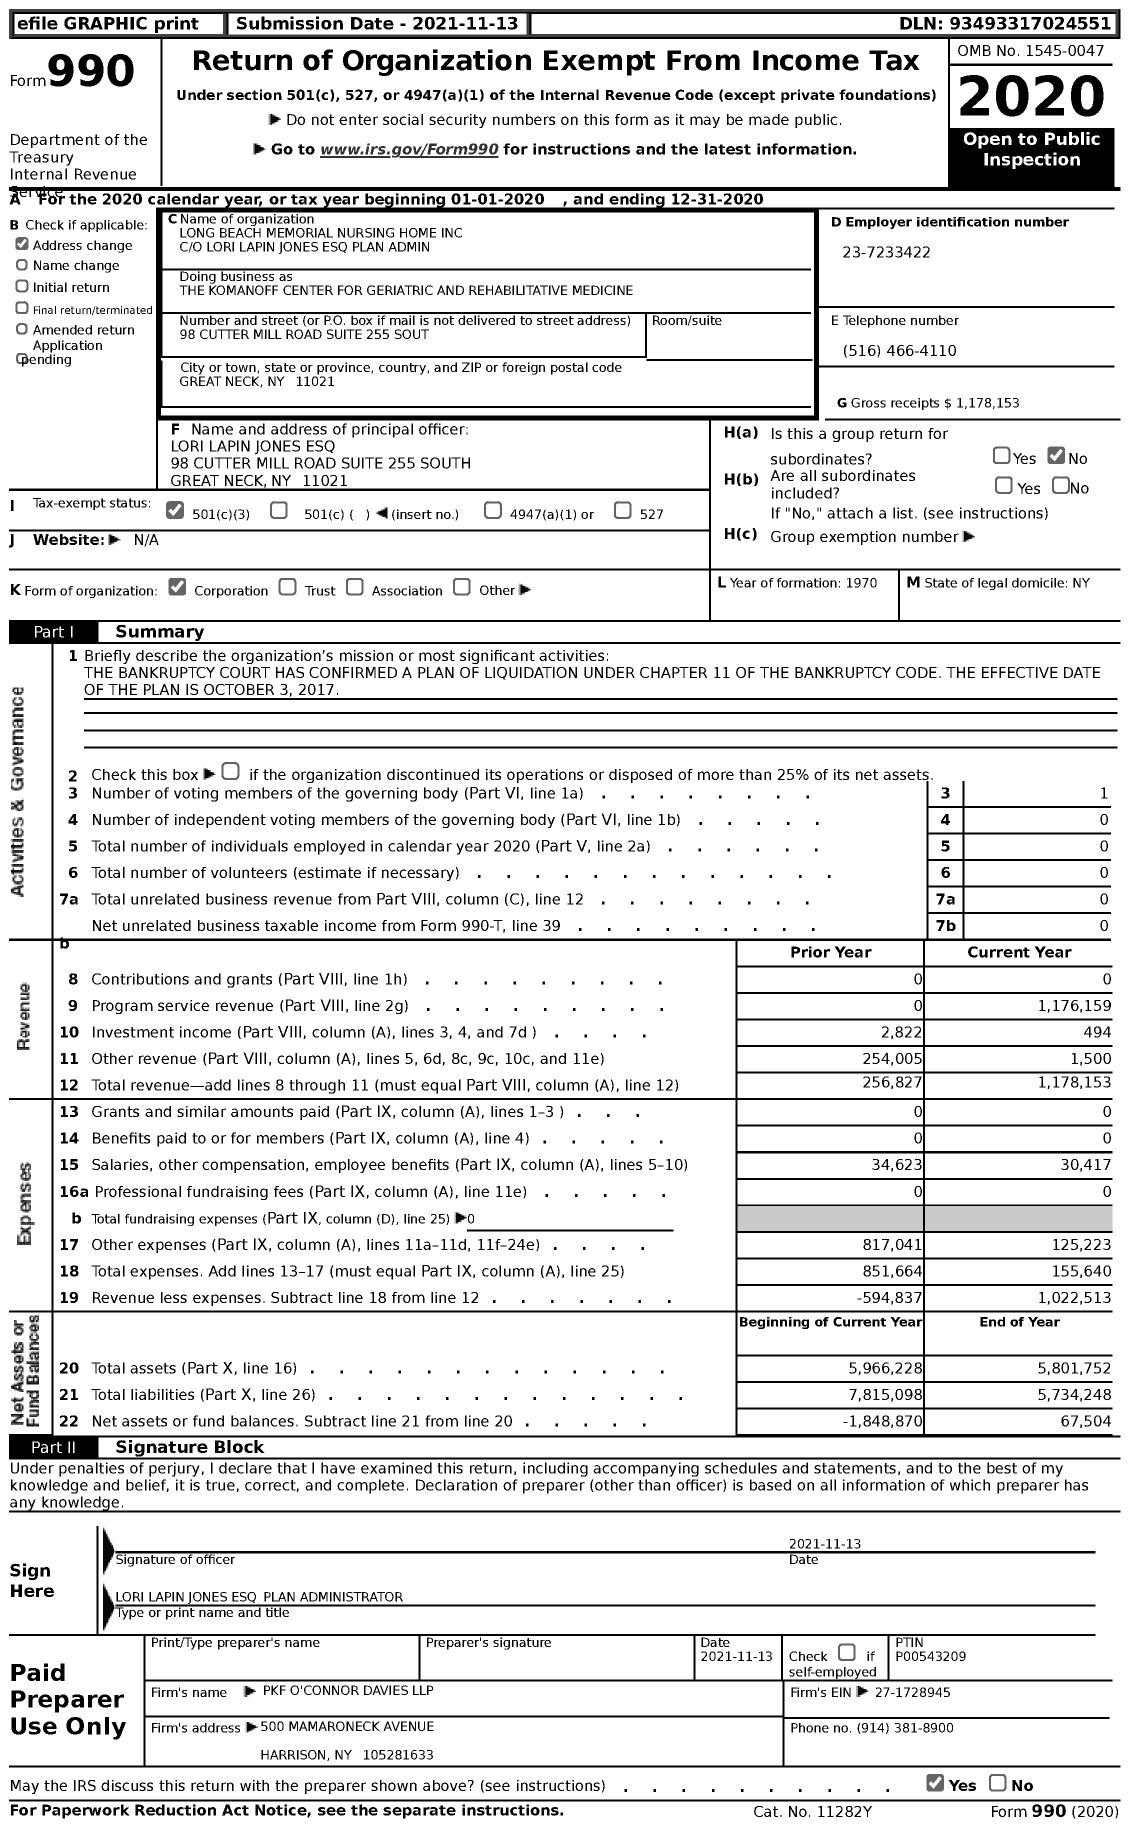 Image of first page of 2020 Form 990 for The Komanoff Center for Geriatric and Rehabilitative Medicine